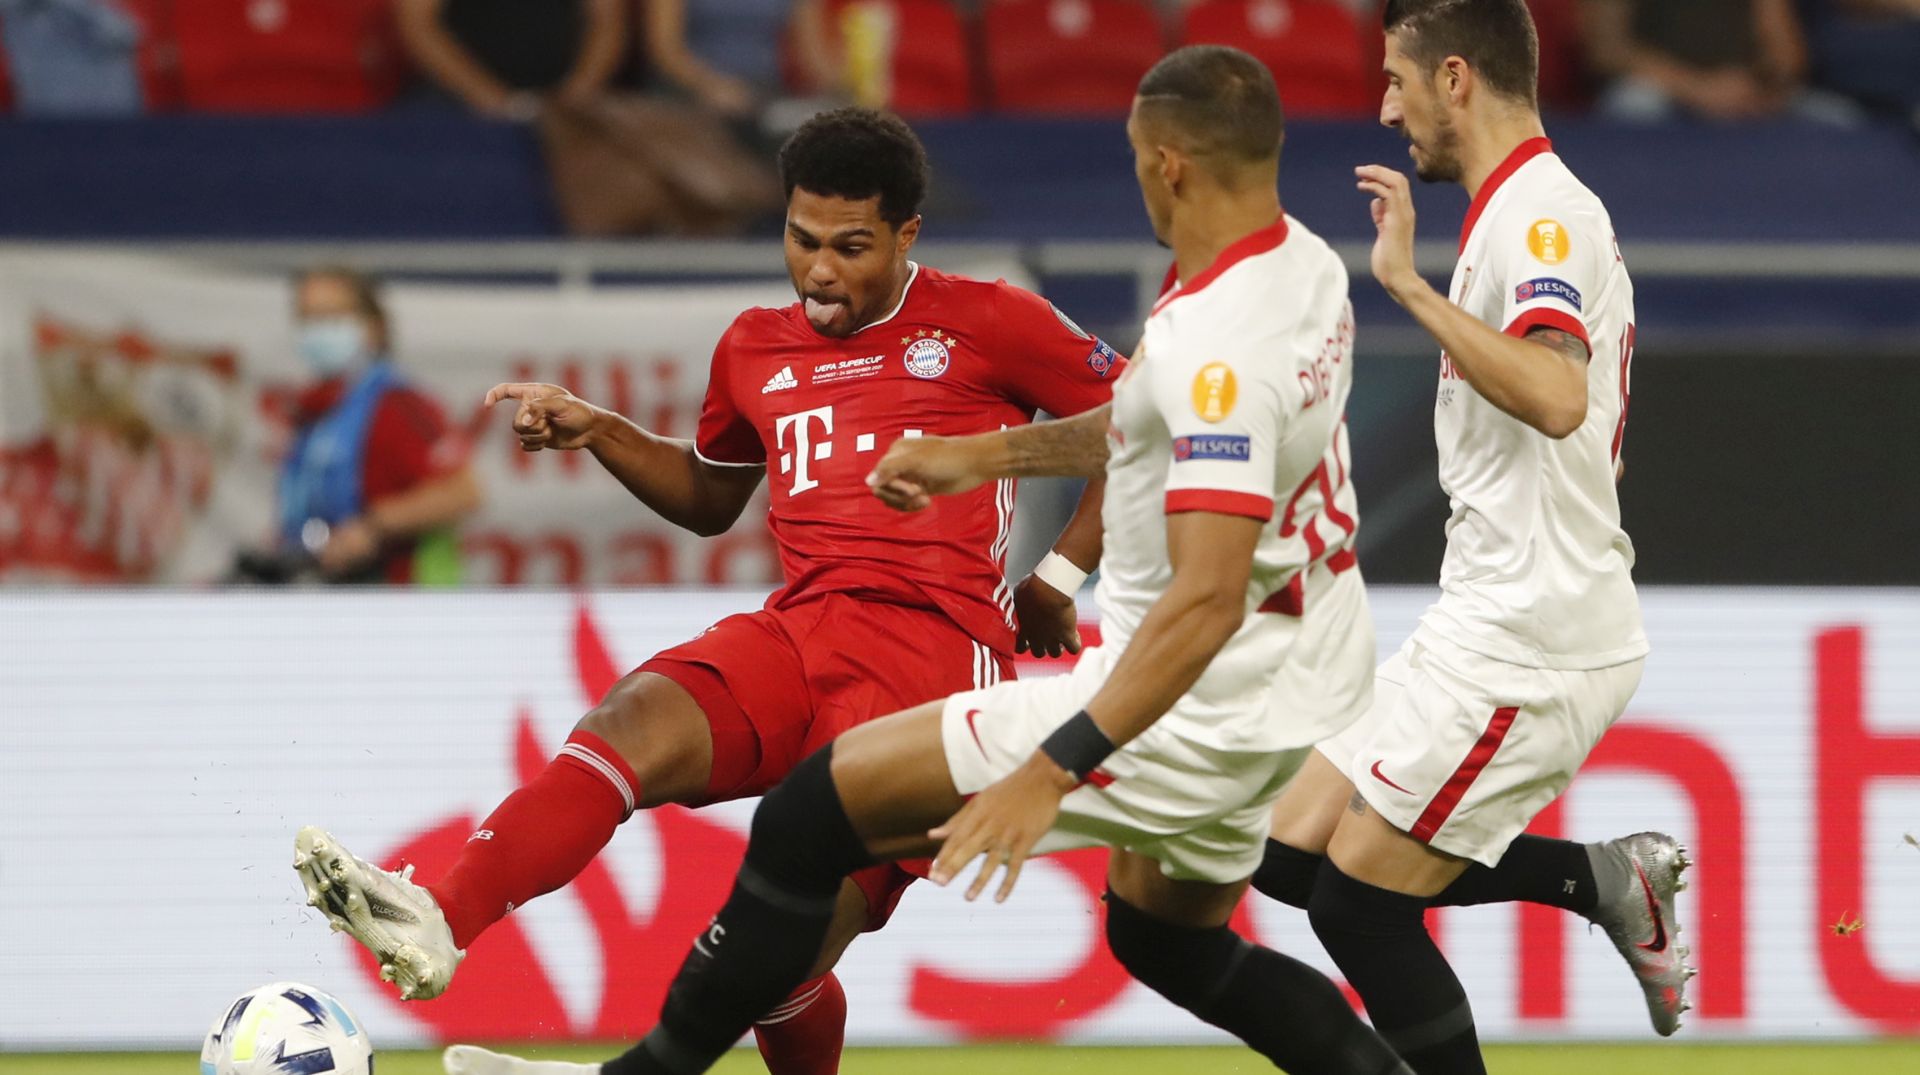 epa08694575 Serge Gnabry (L) of Bayern Munich in action during the UEFA Super Cup final between Bayern Munich and Sevilla at the Puskas Arena in Budapest, Hungary, 24 September 2020.  EPA/Bernadett Szabo / POOL